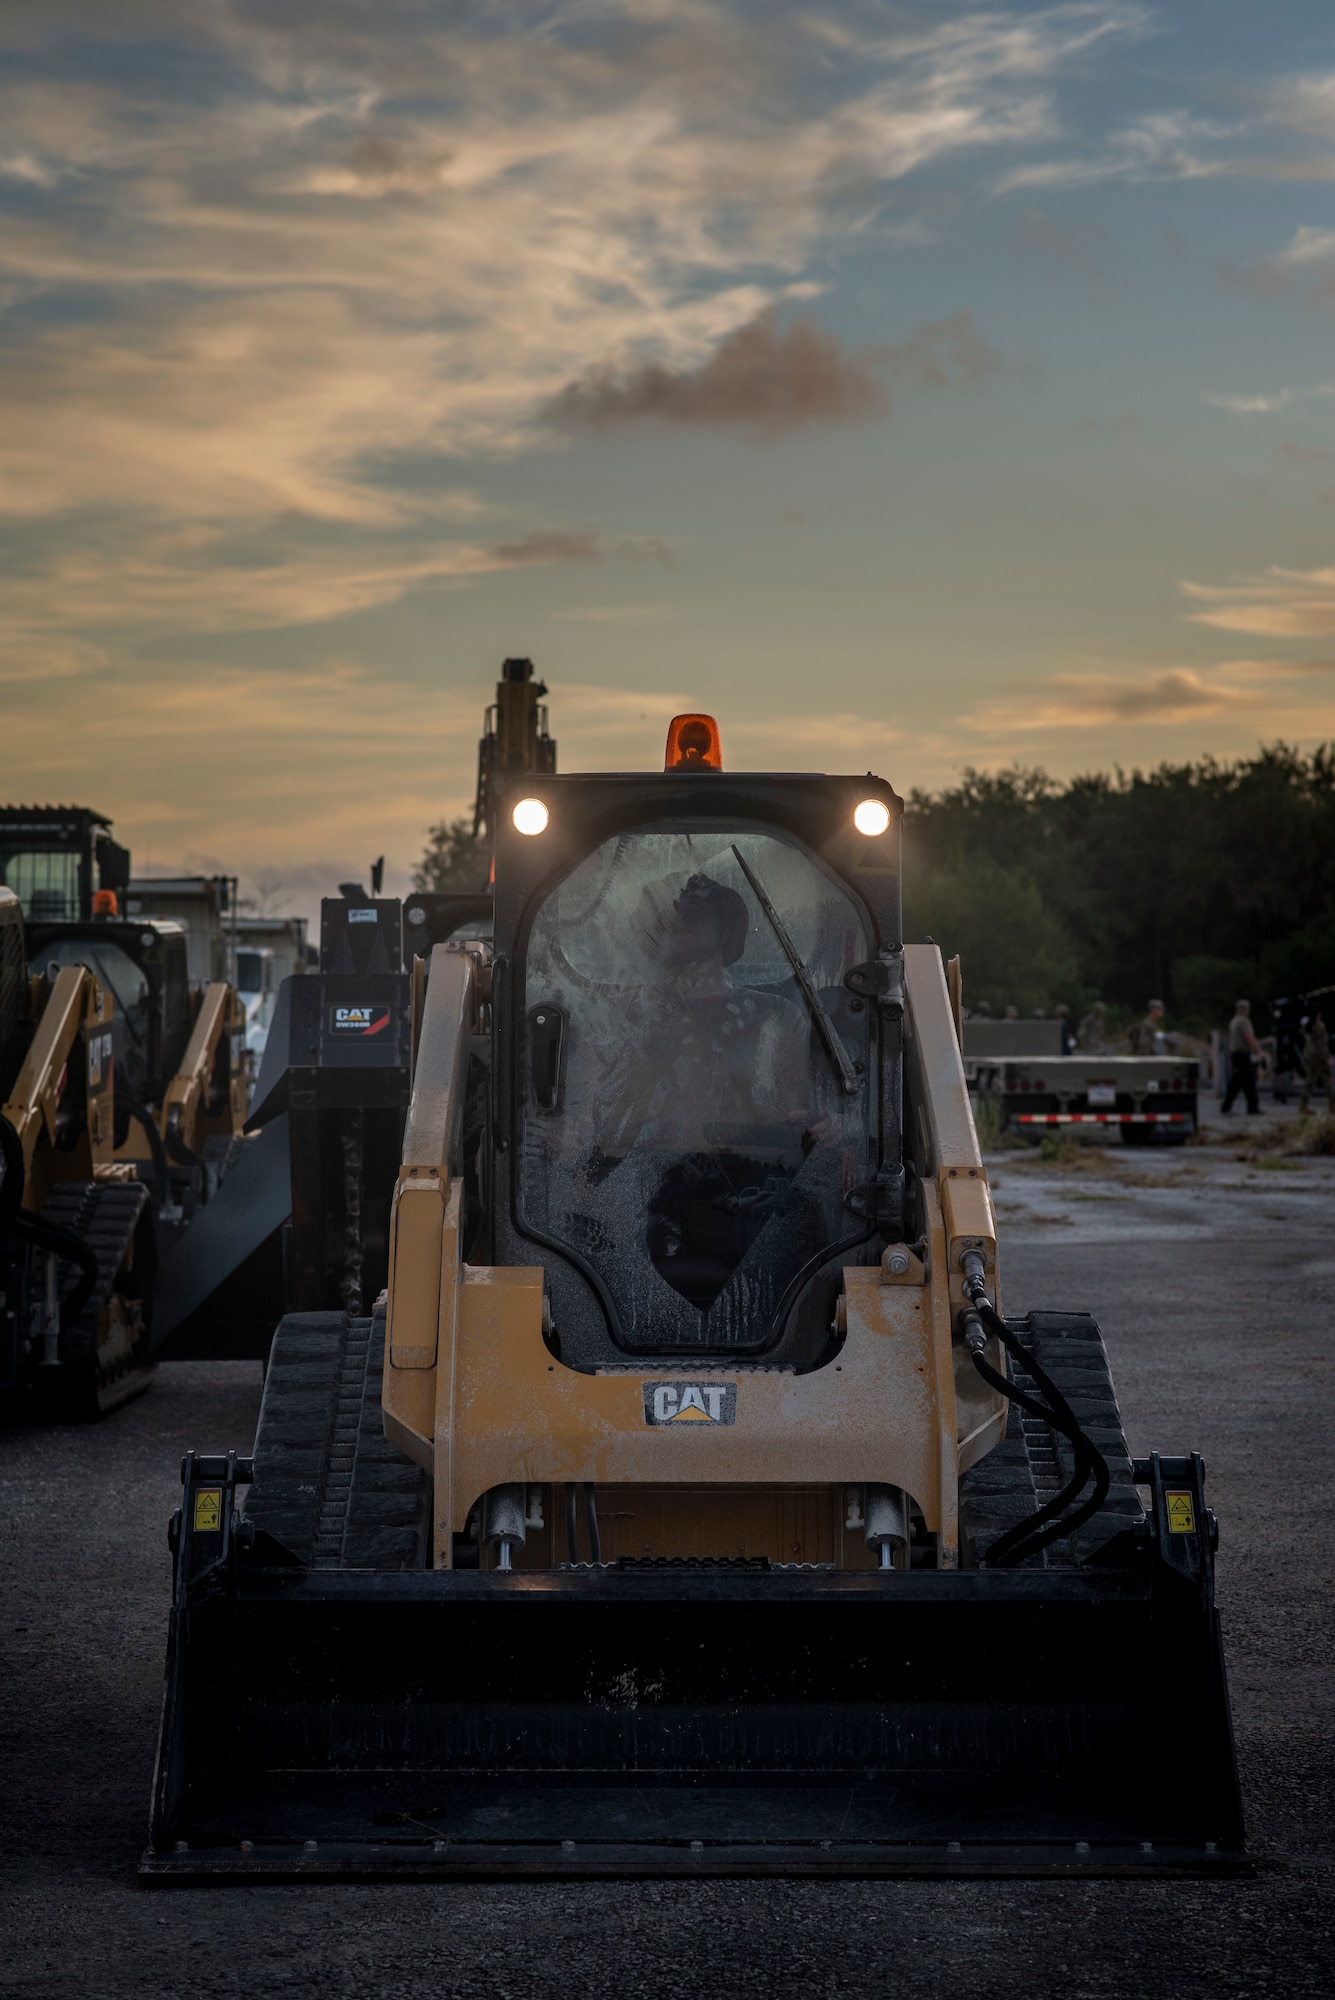 An Airmen with the 554th RED HORSE Squadron conducts an equipment check on his heavy machinery during a Rapid Airfield Damage Repair (RADR) Exercise at Andersen Air Force Base, Feb. 12, 2021.